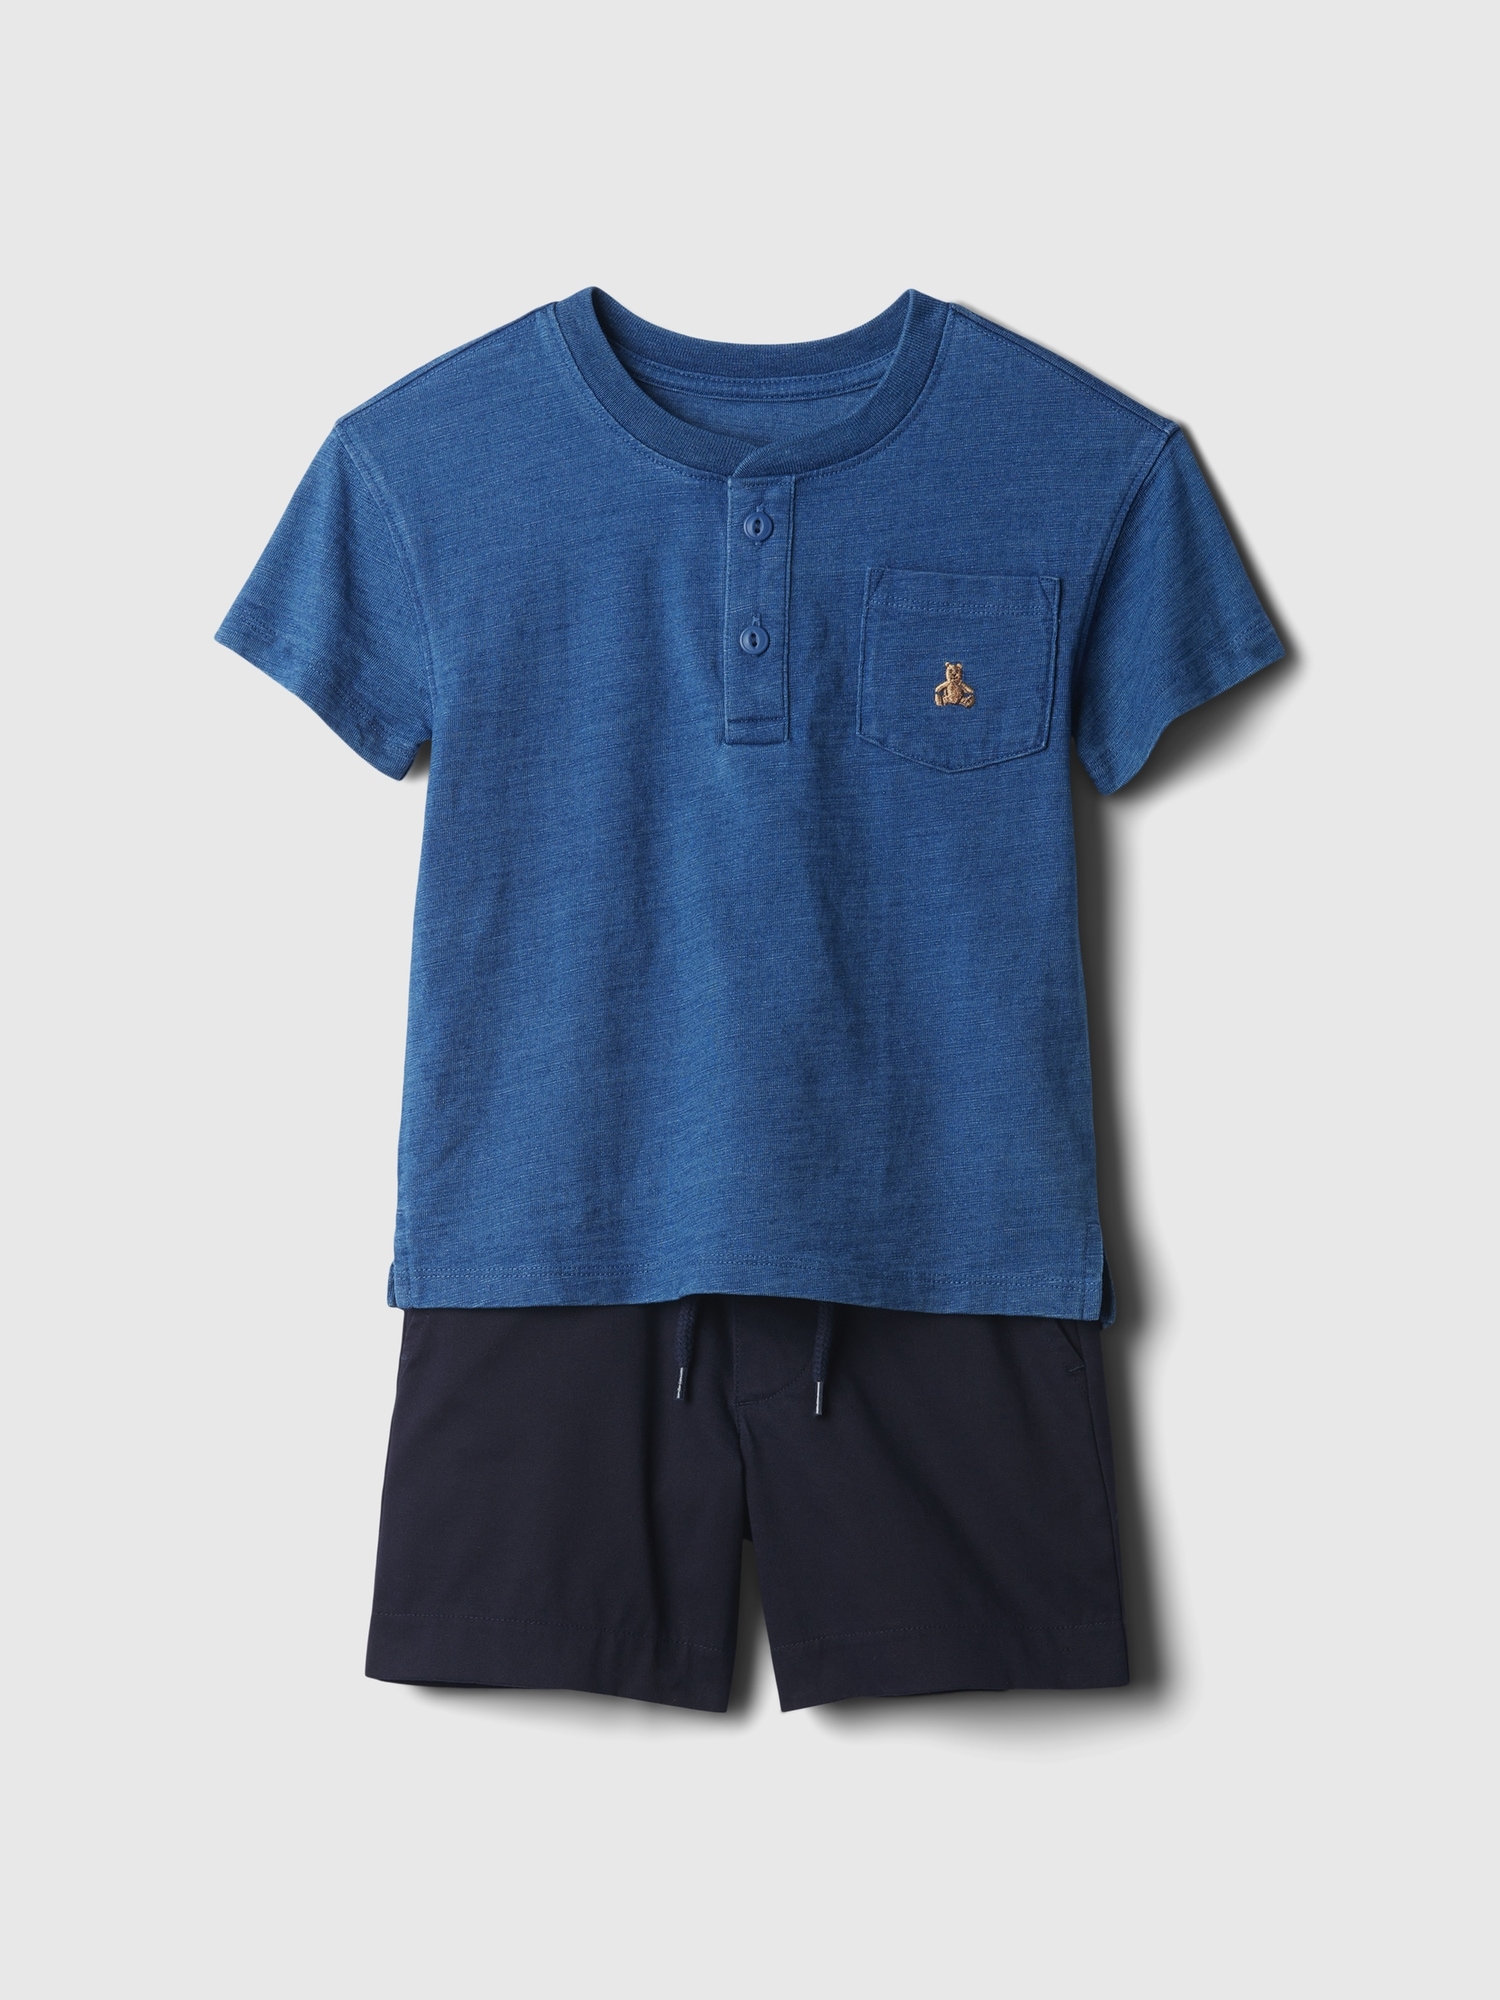 babyGap Henley Outfit Set